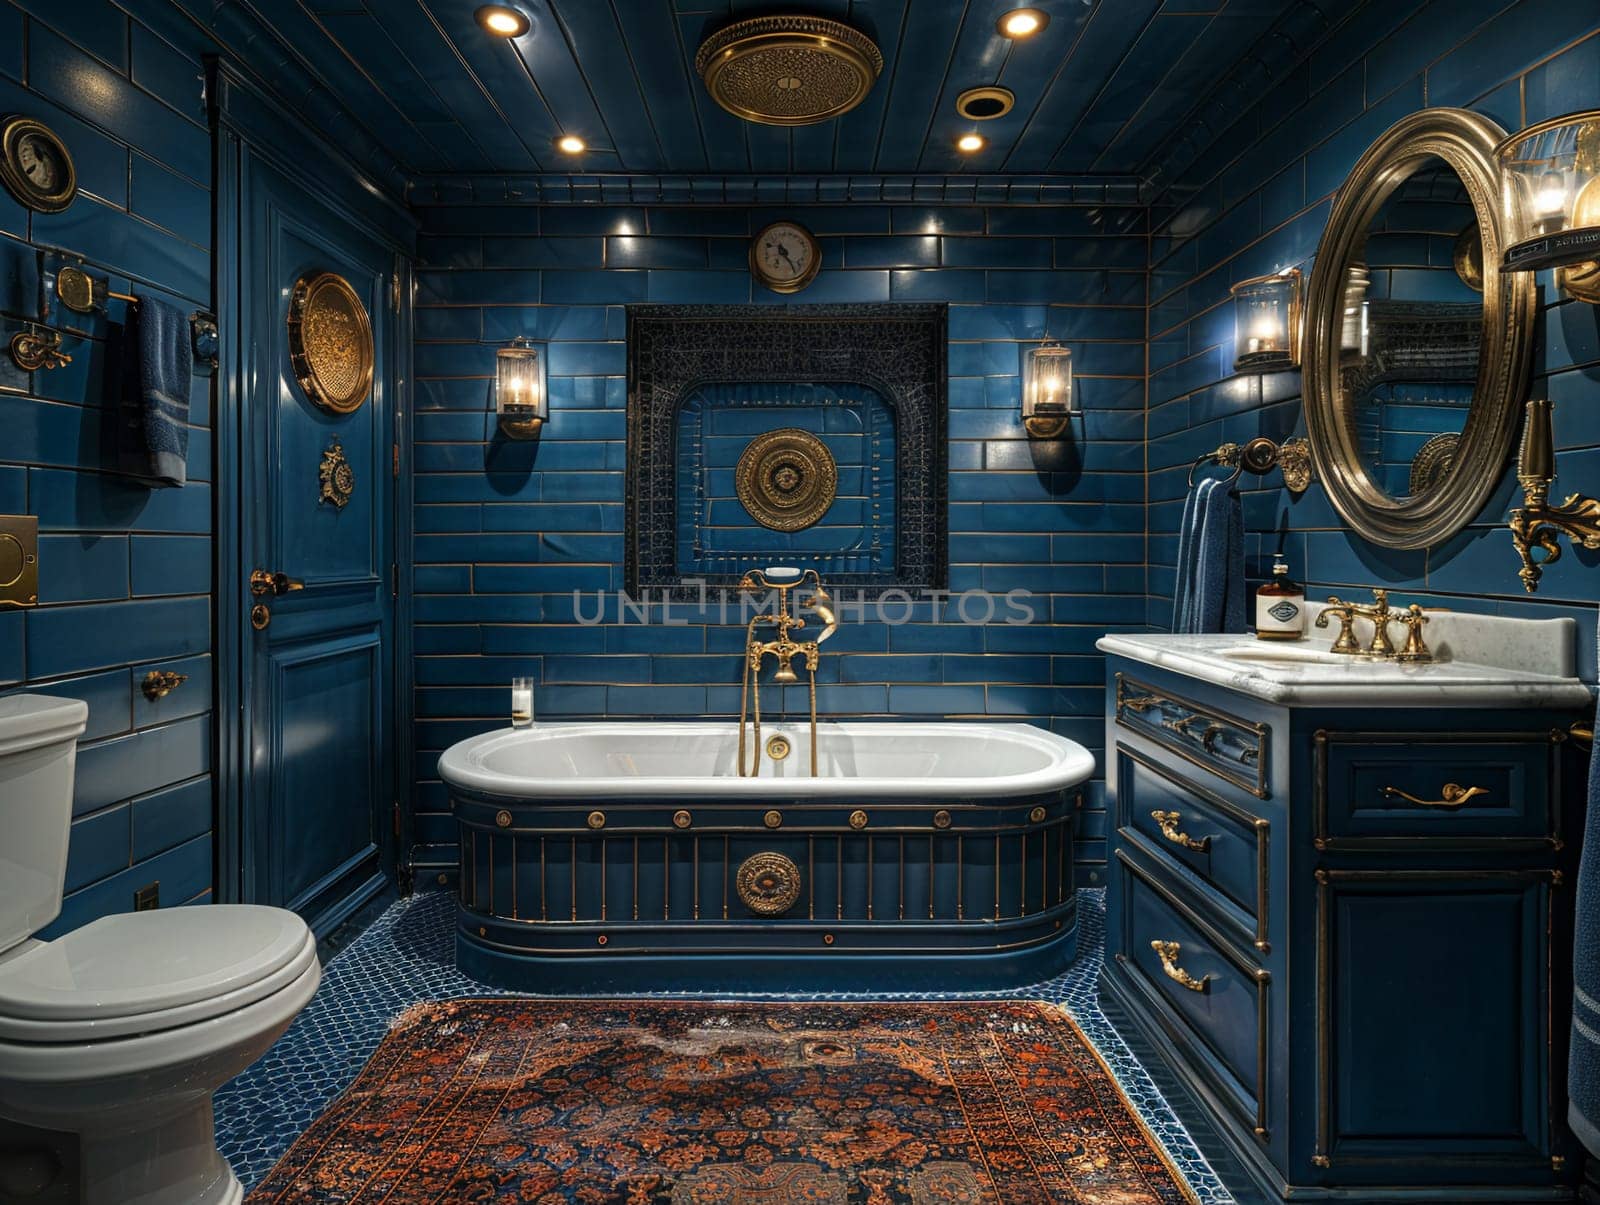 Nautical-themed bathroom with navy stripes and brass fixtures